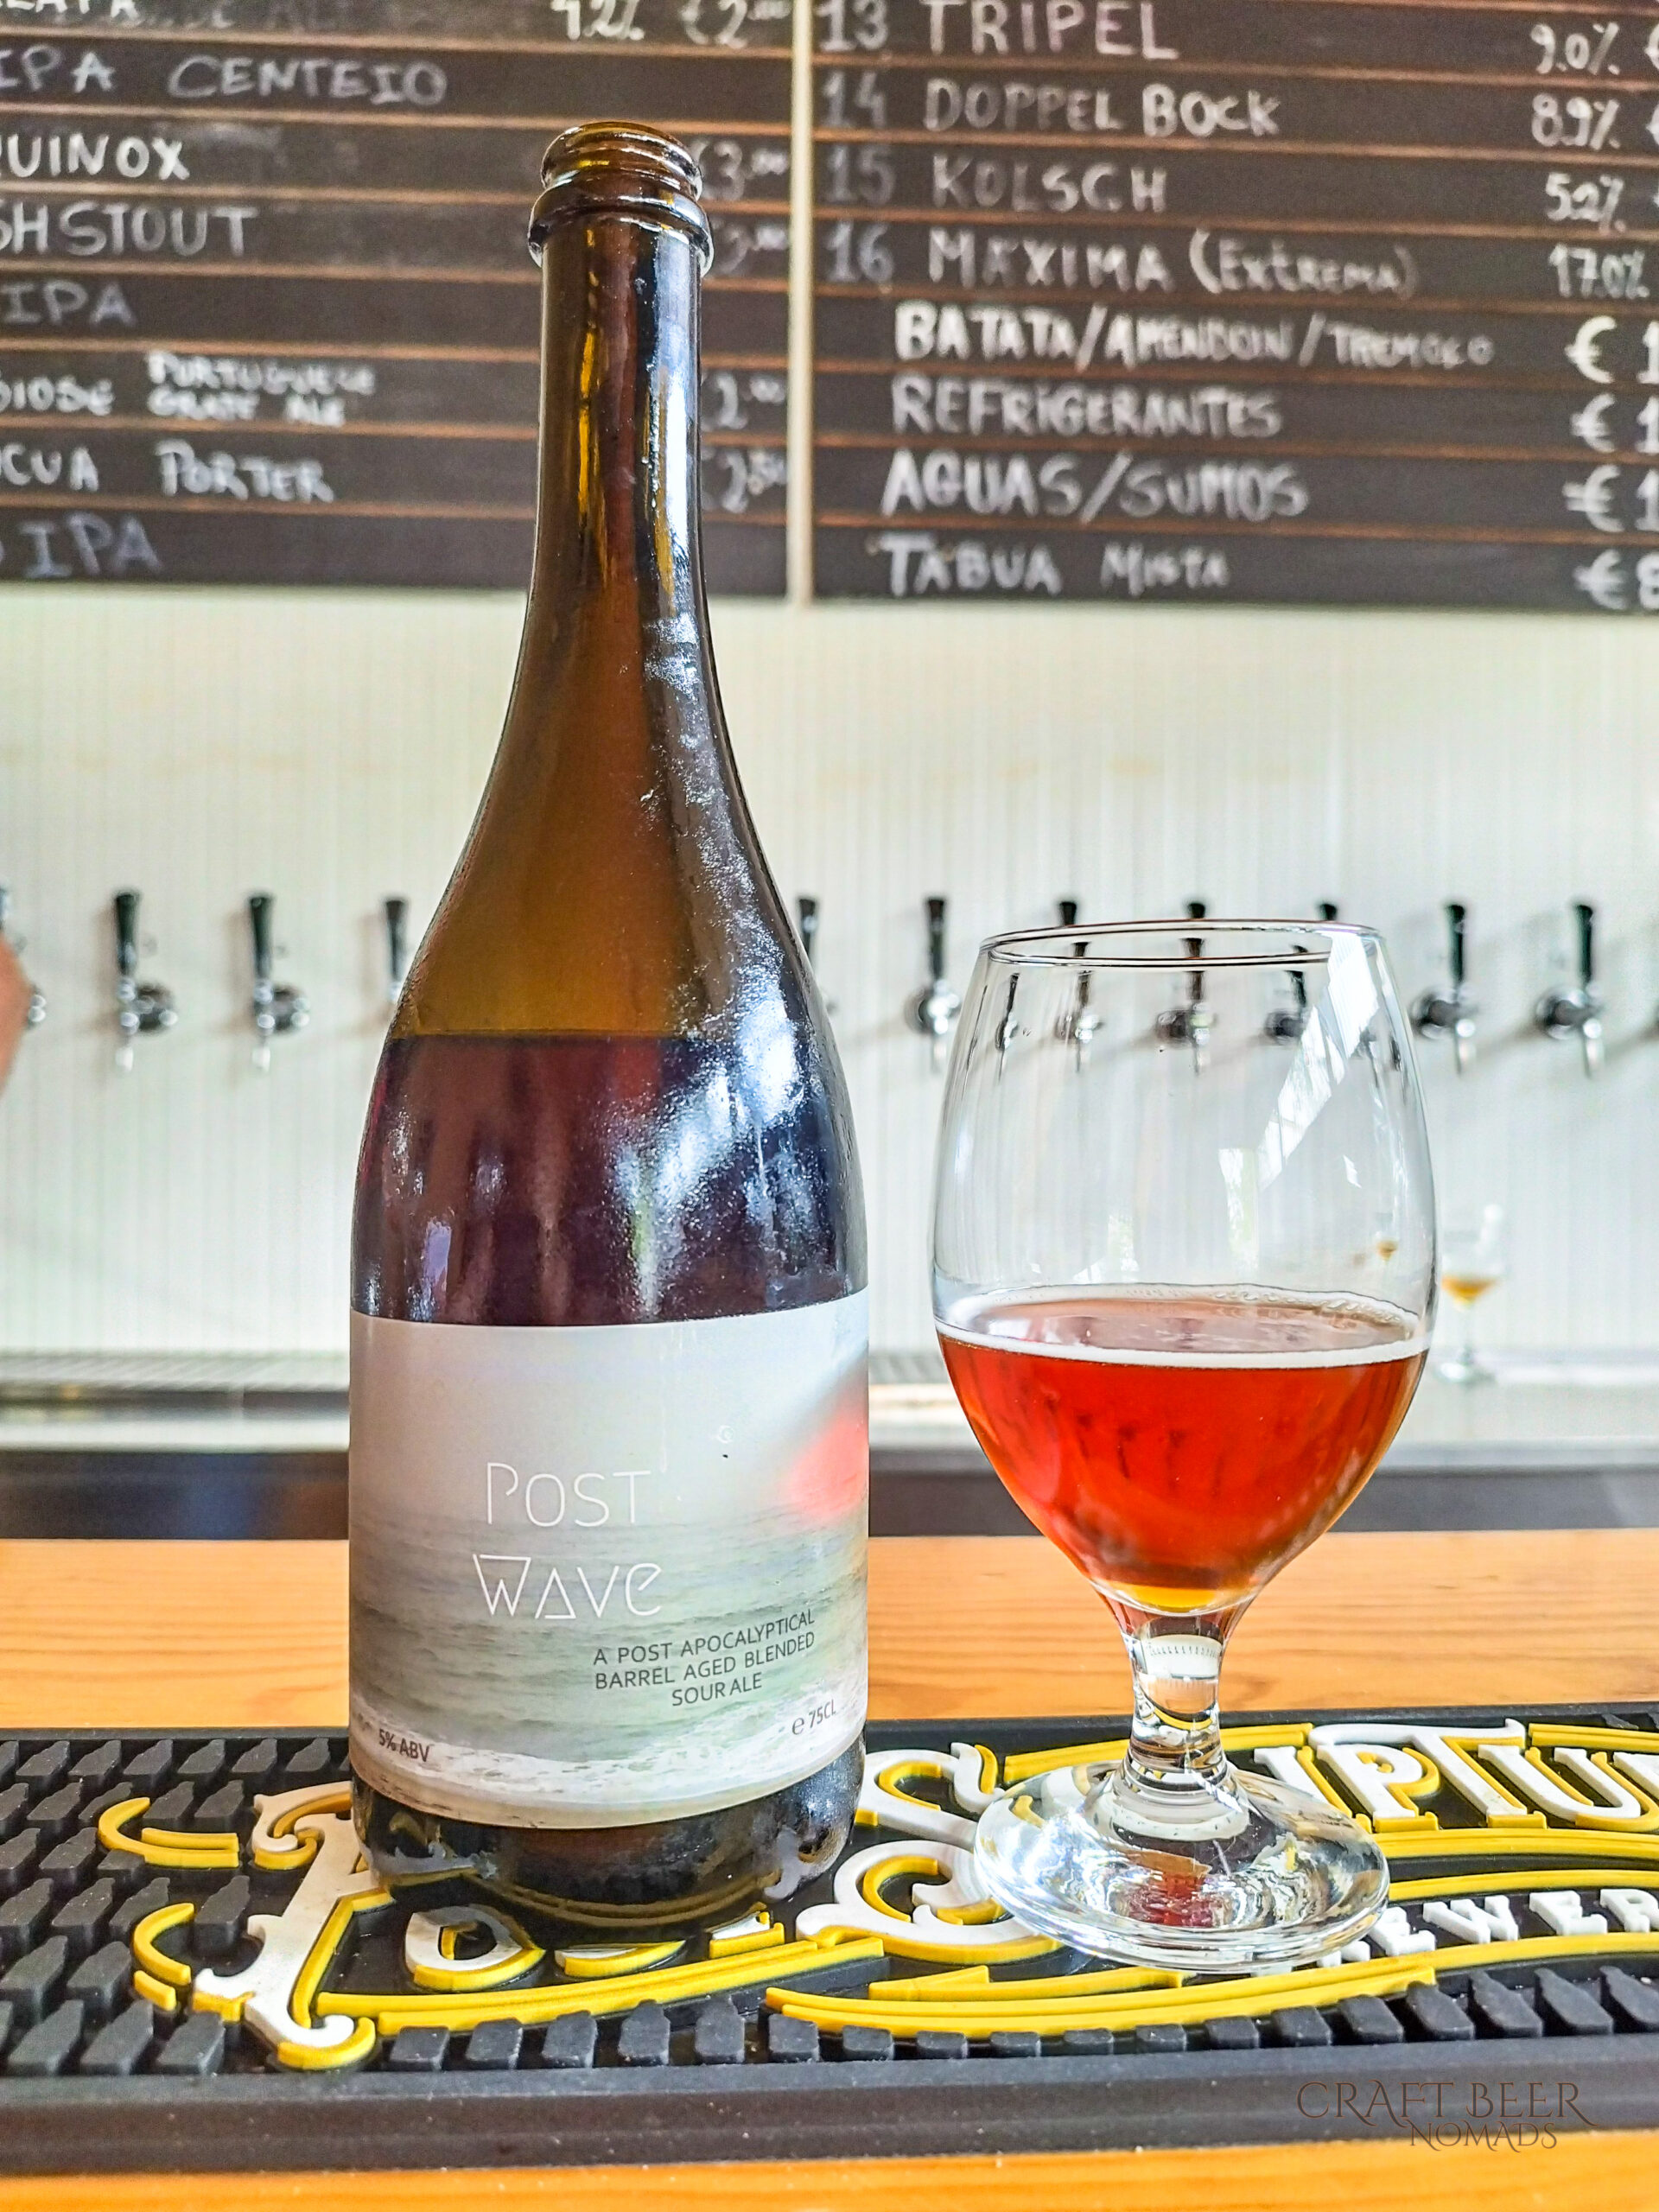 PostWave BA Sour craft beer by Post Sricptum from Portugal and ShortWave)